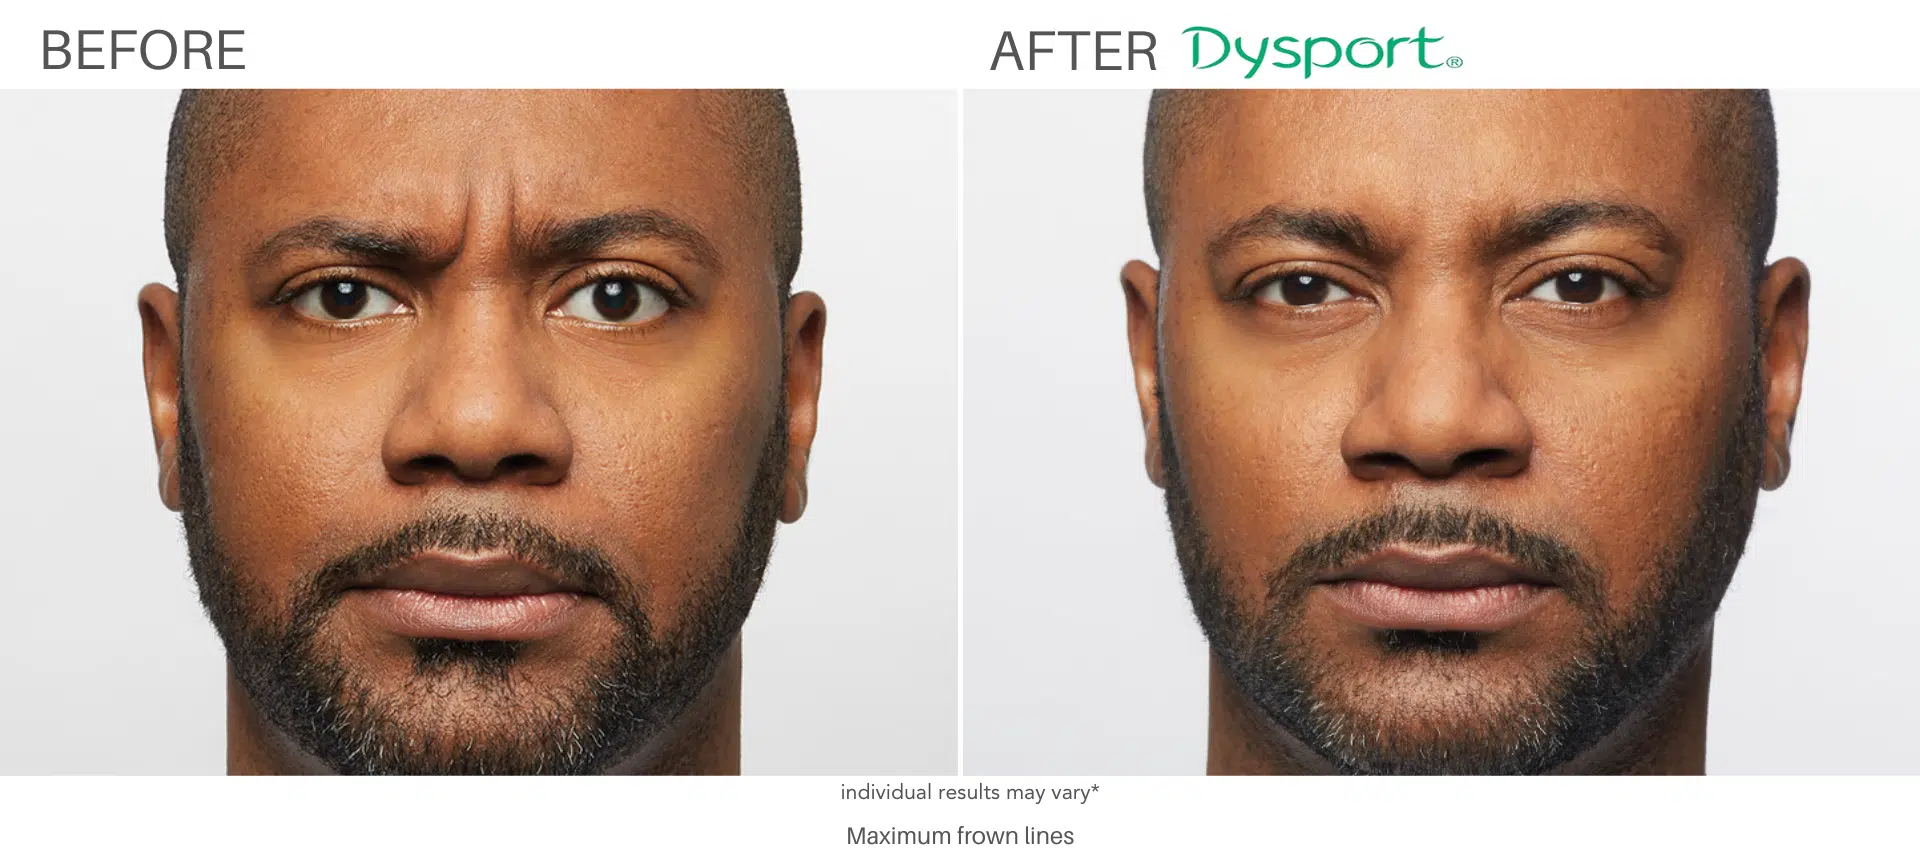 Man Frown LInes before and after Dysport treatment at always beautiful, Denver CO